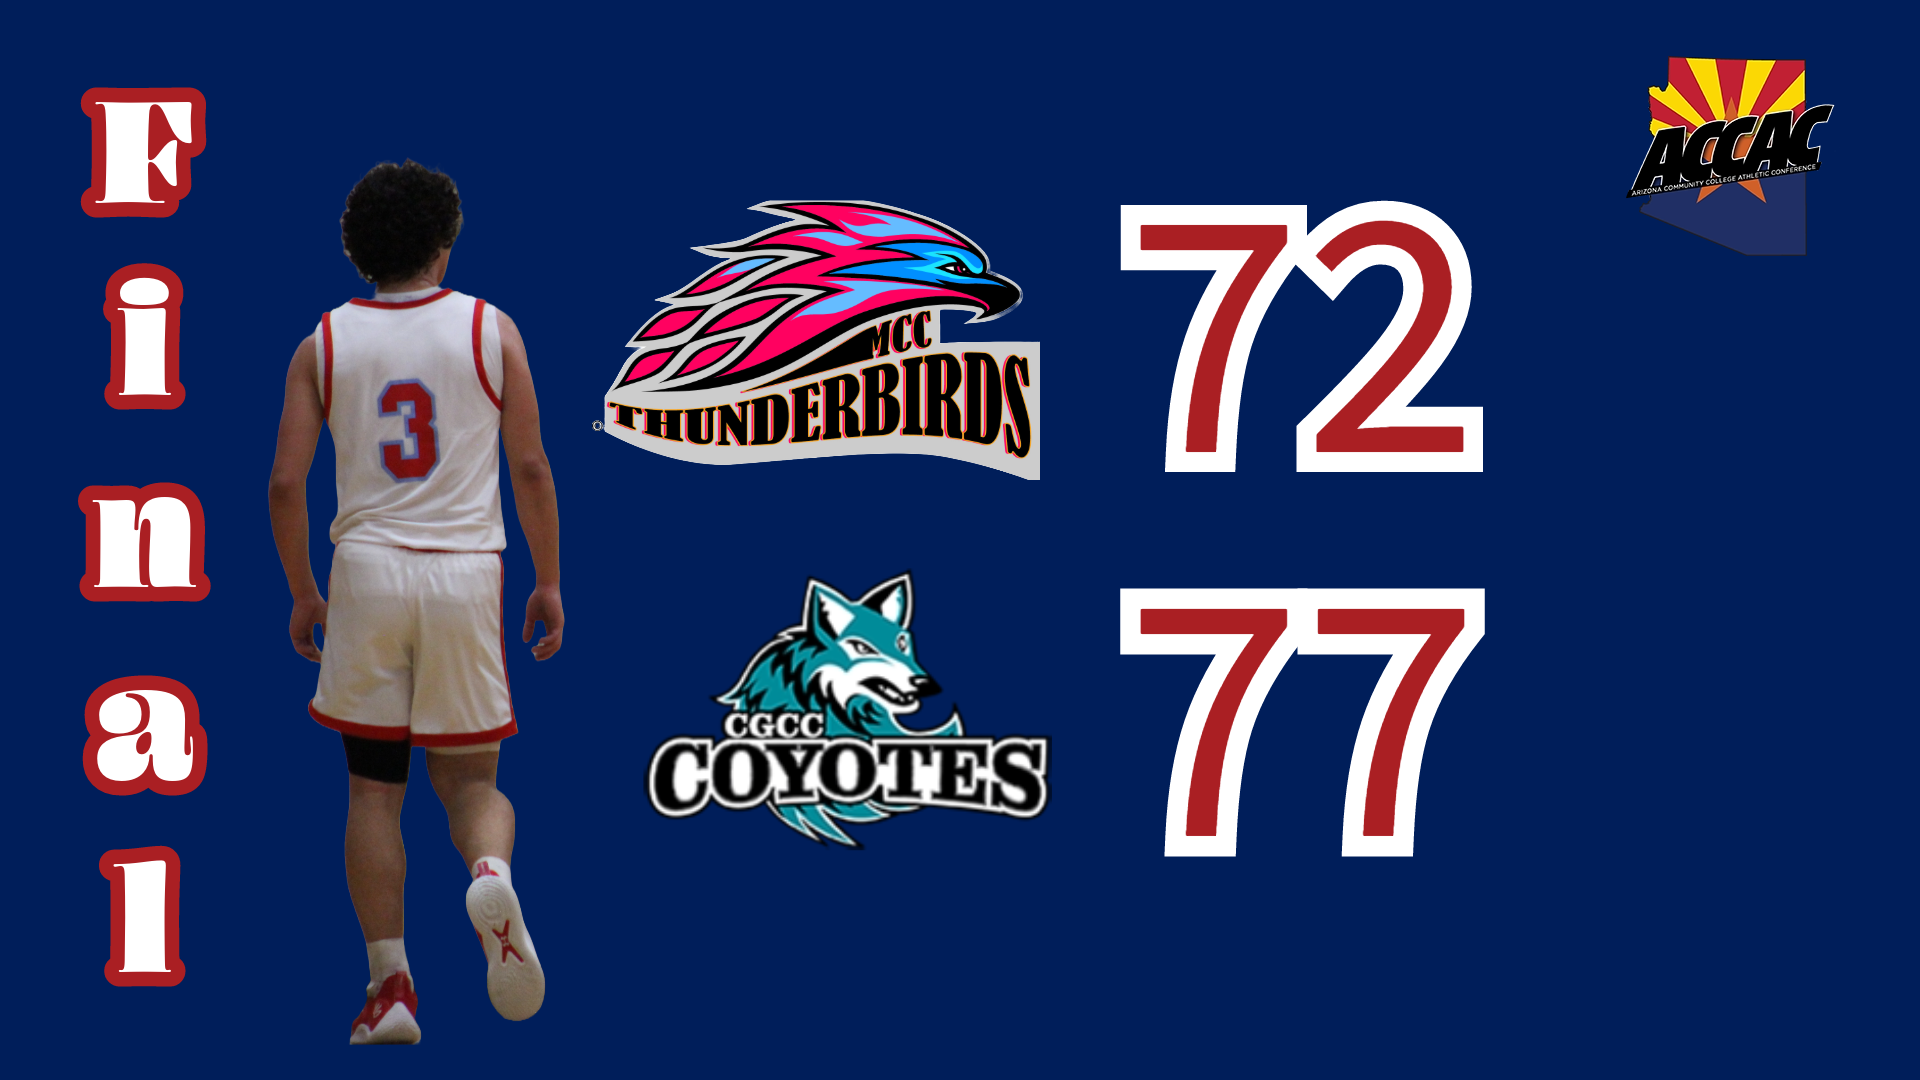 Career night from Gonzales not enough as Men's Basketball falls to Chandler-Gilbert